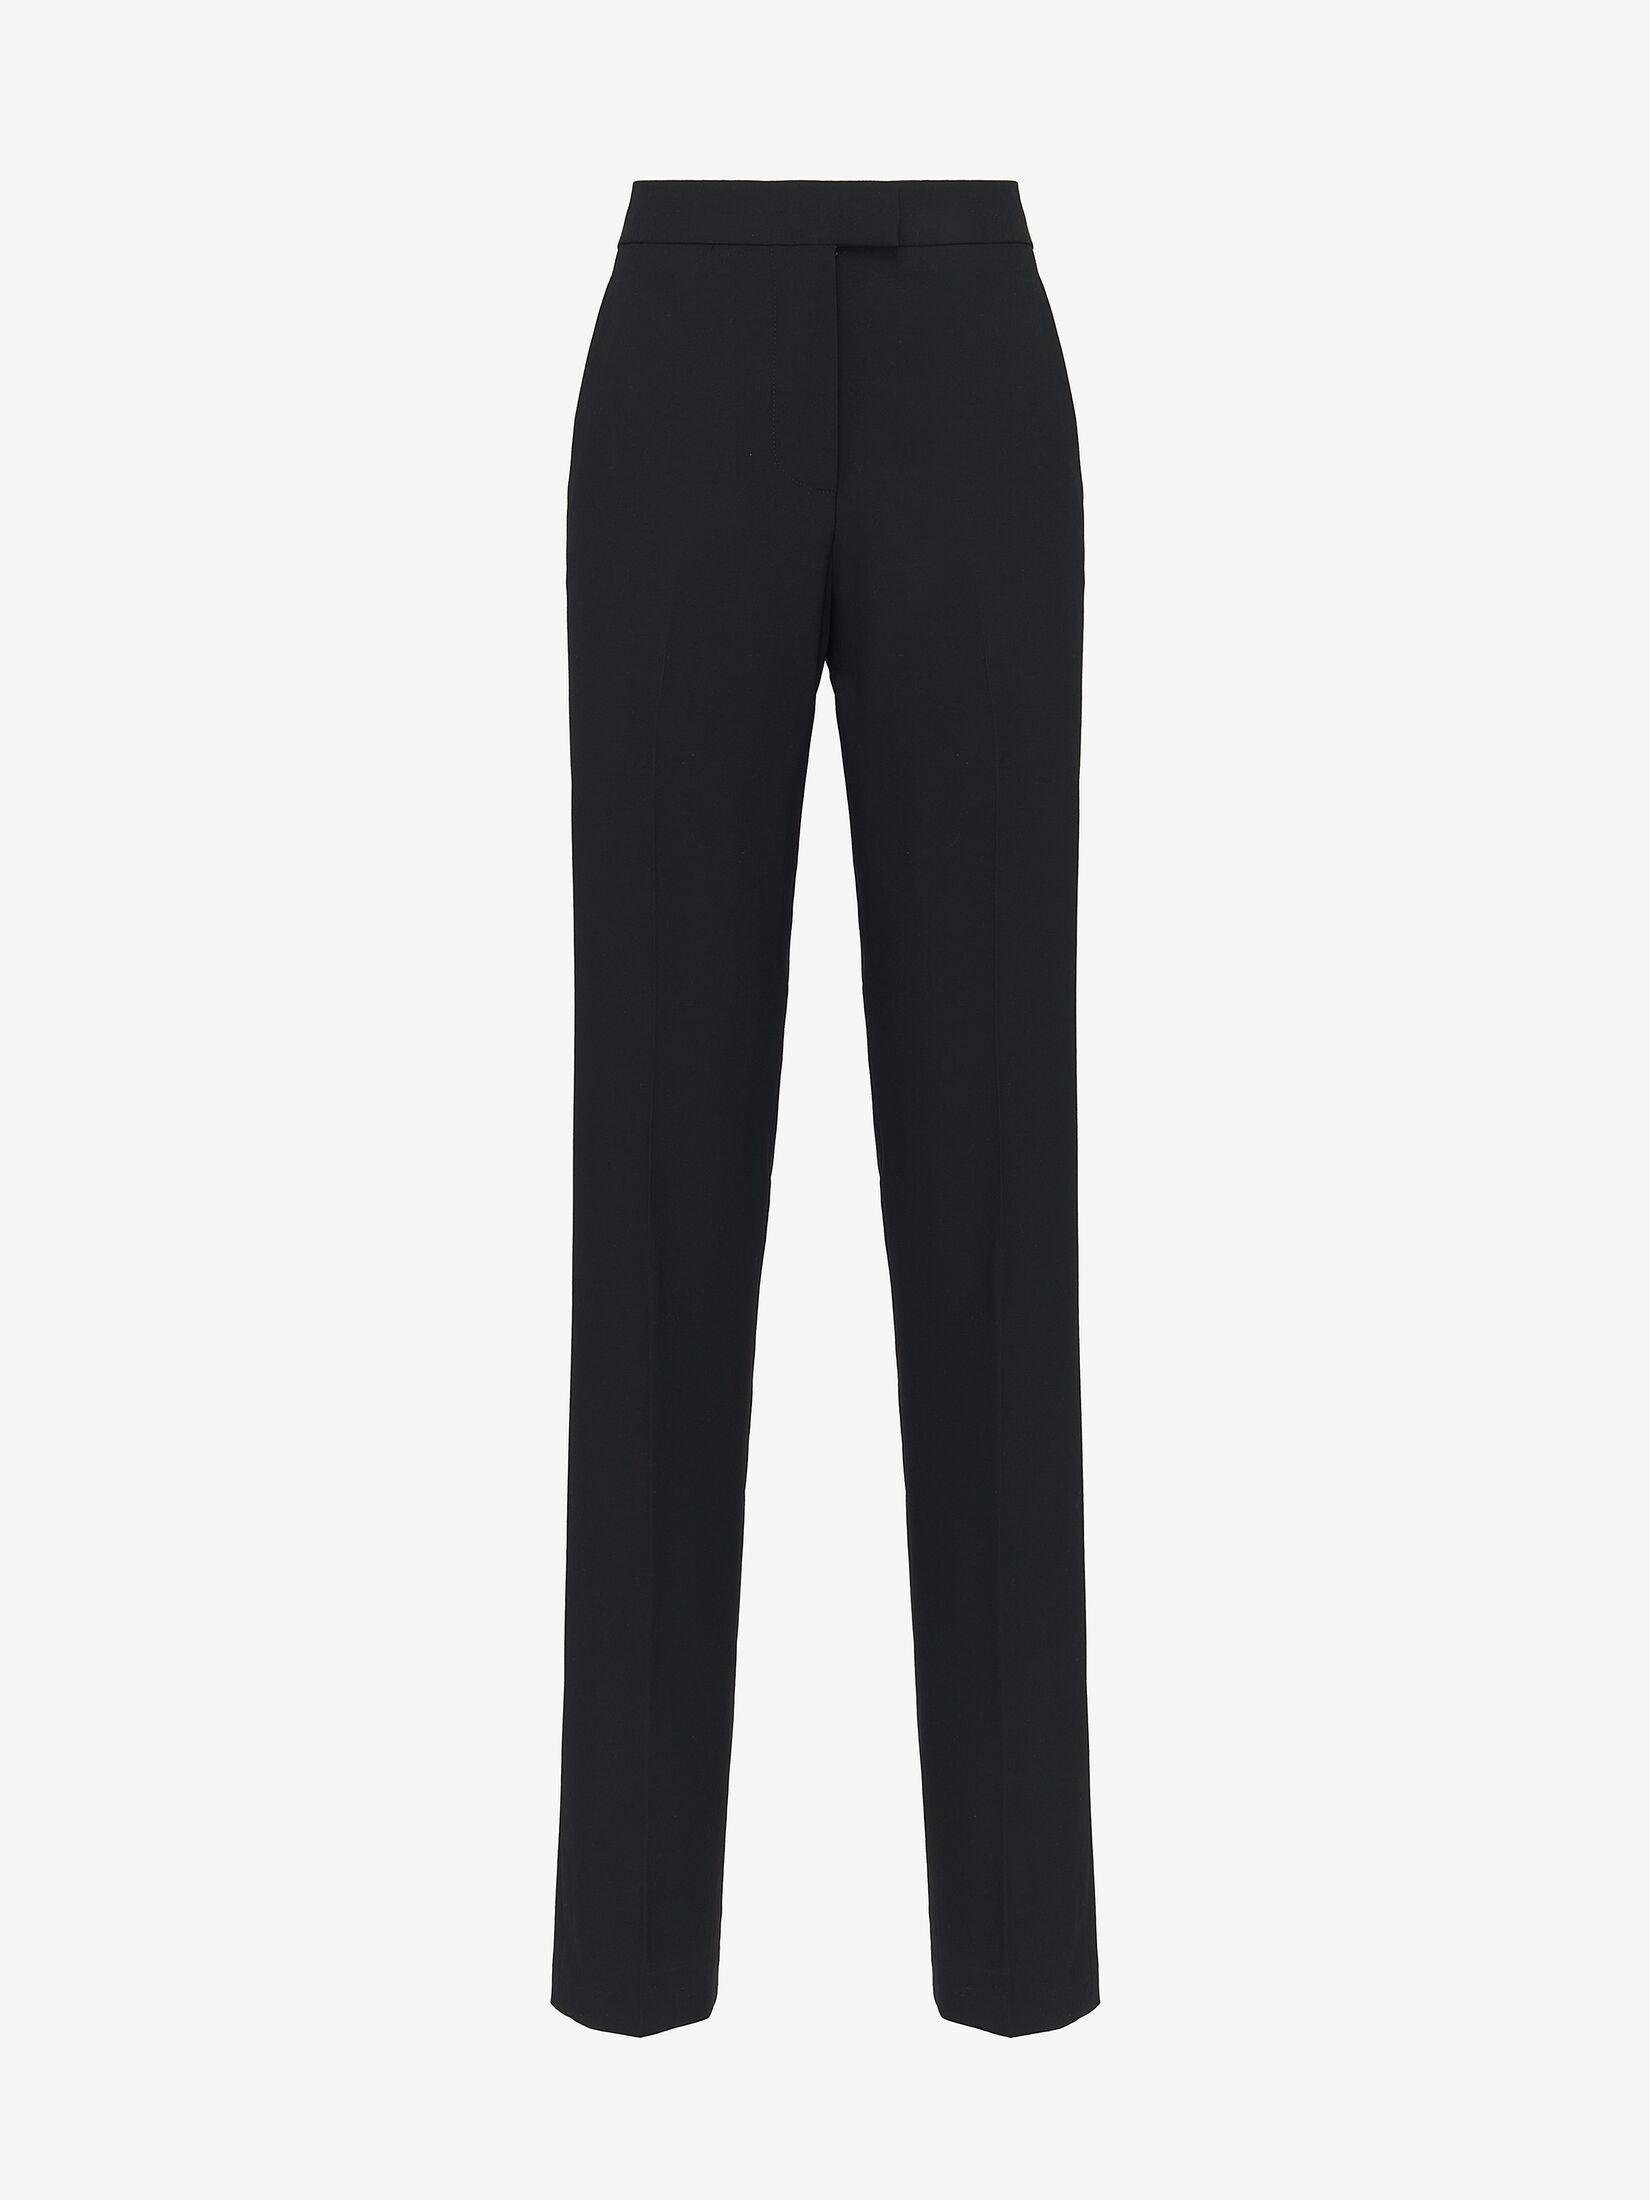 High-waisted Cigarette Trousers by ALEXANDER MCQUEEN